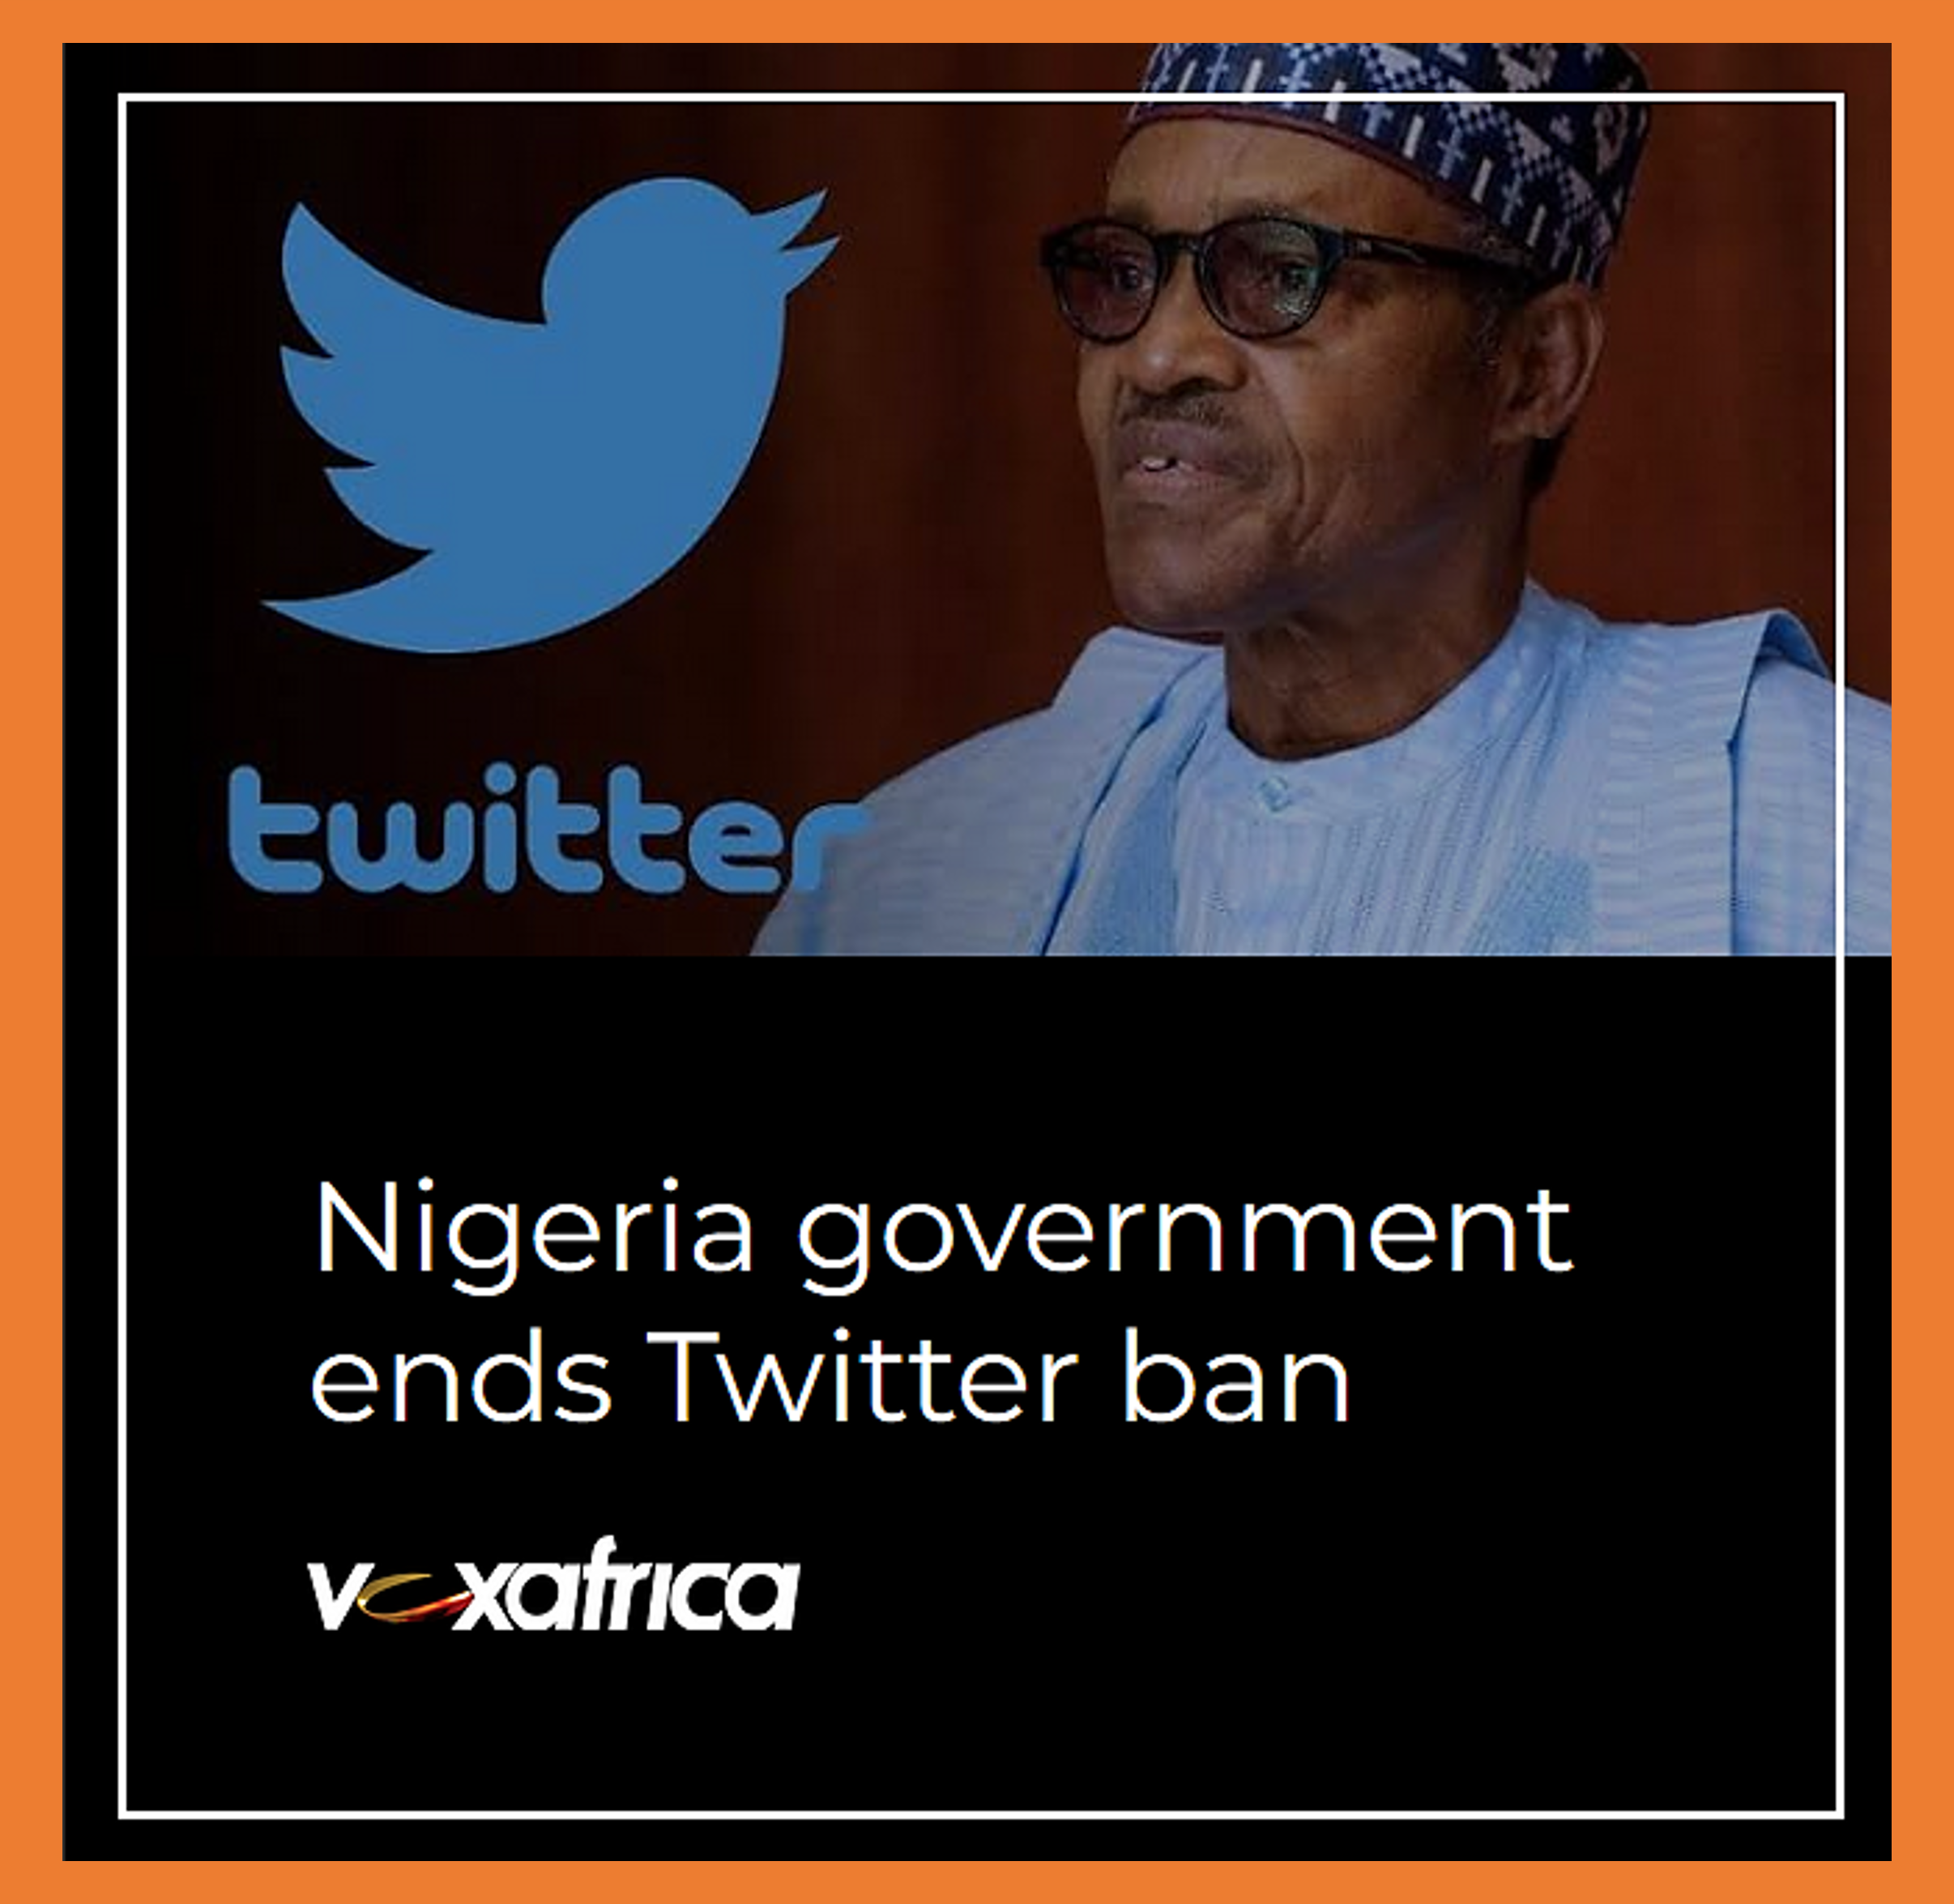 NIGERIA GOVERNMENT ENDS TWITTER BAN